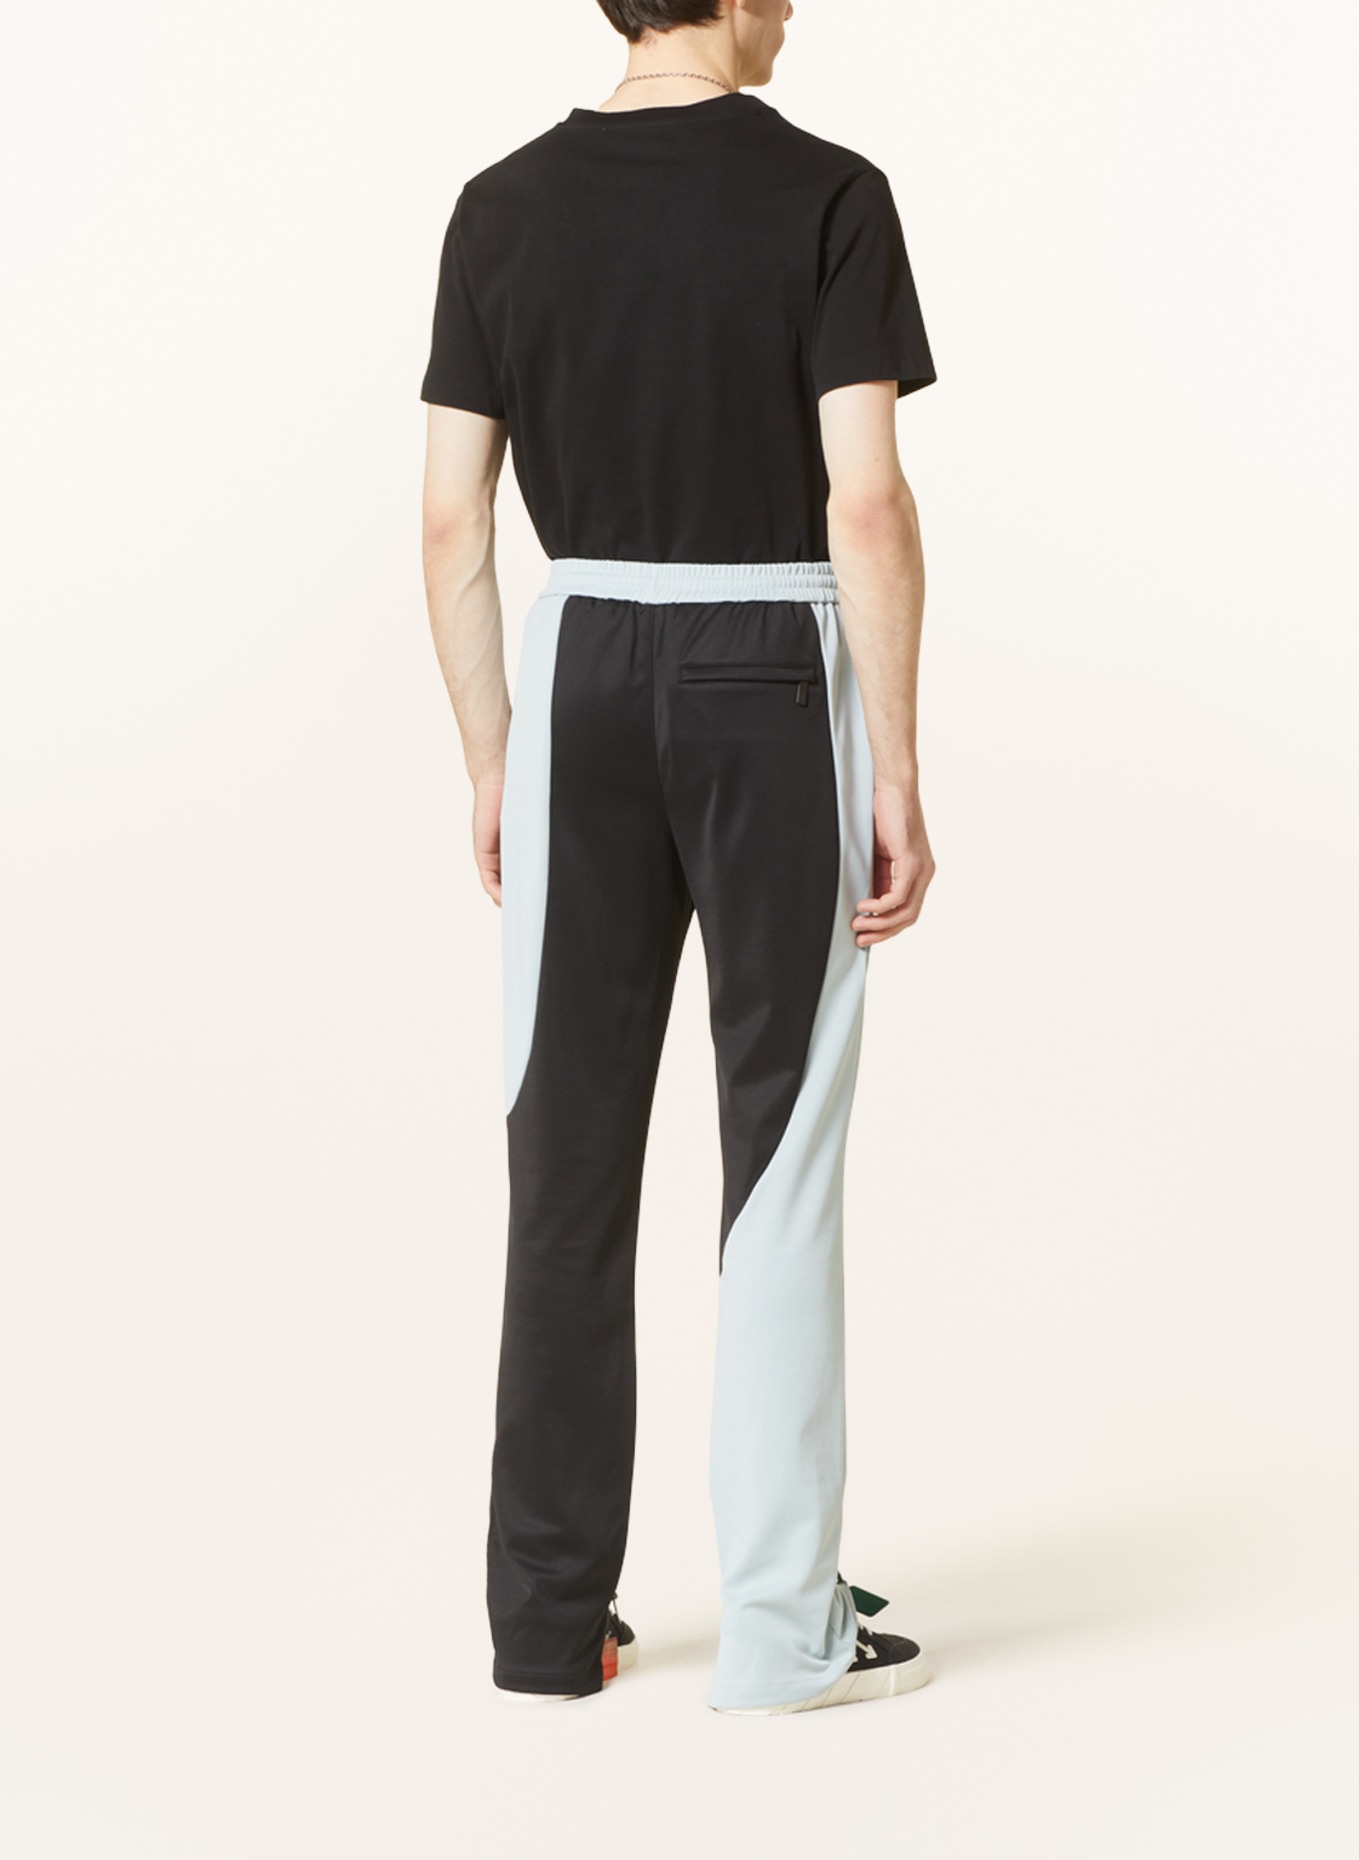 Off-White Pants in jogger style, Color: BLACK/ LIGHT GRAY (Image 3)